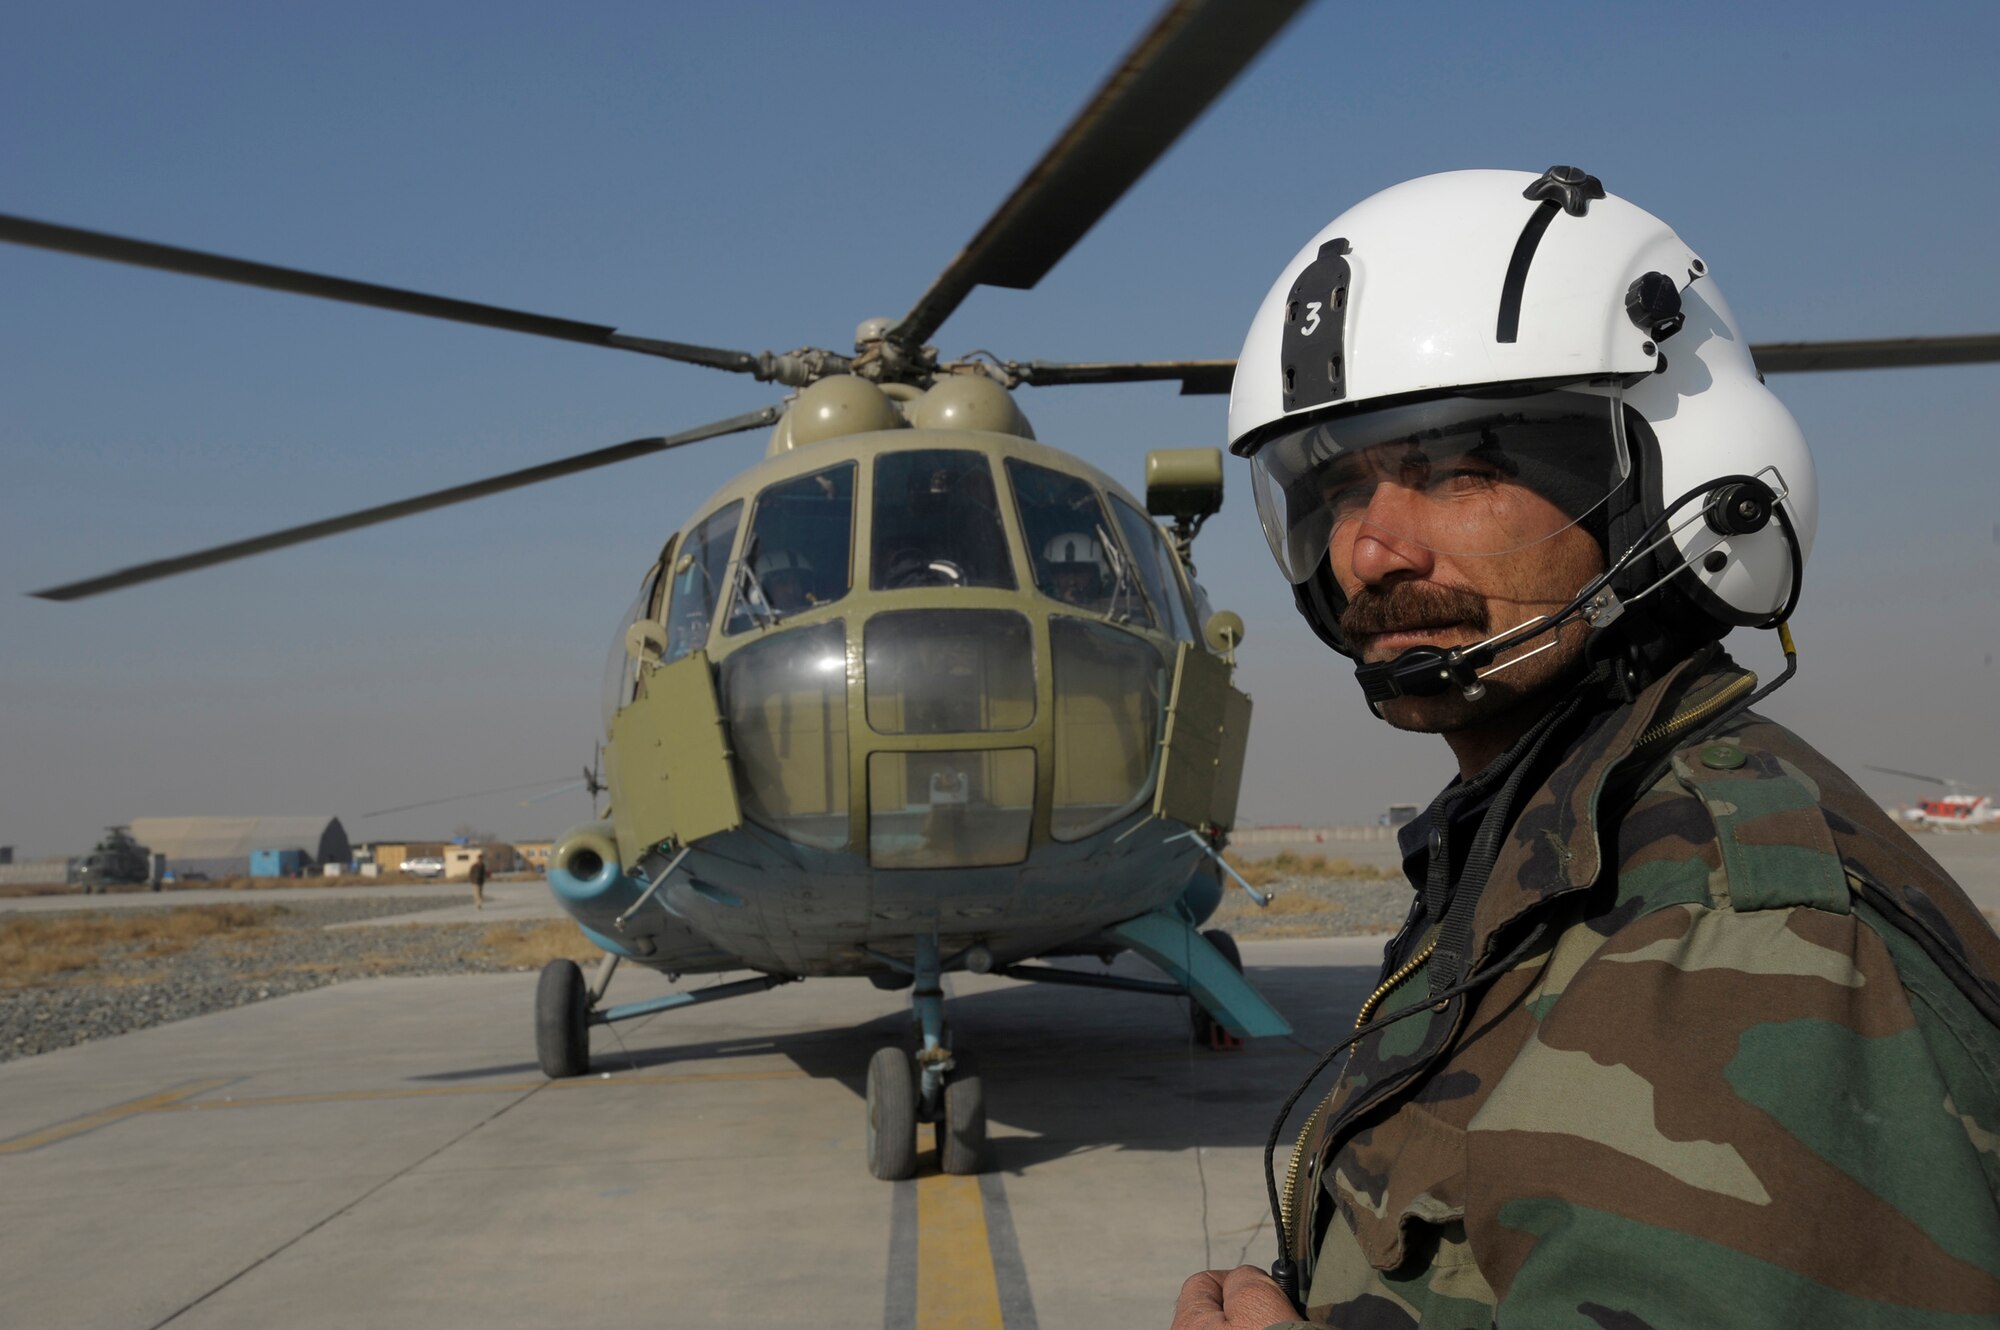 KABUL, Afghanistan -- An Afghan National Army Air Corps Mi-17 flight engineer stands by during engine start-up before a mission here. The ANAAC crews are mentored by the 438th Air Expeditionary Wing. U.S. Air Force pilots assigned to the wing regularly fly with the Afghan crews as instructor pilots on the Soviet built helicopter. (U.S. Air Force photo/Master Sgt. Keith Brown)